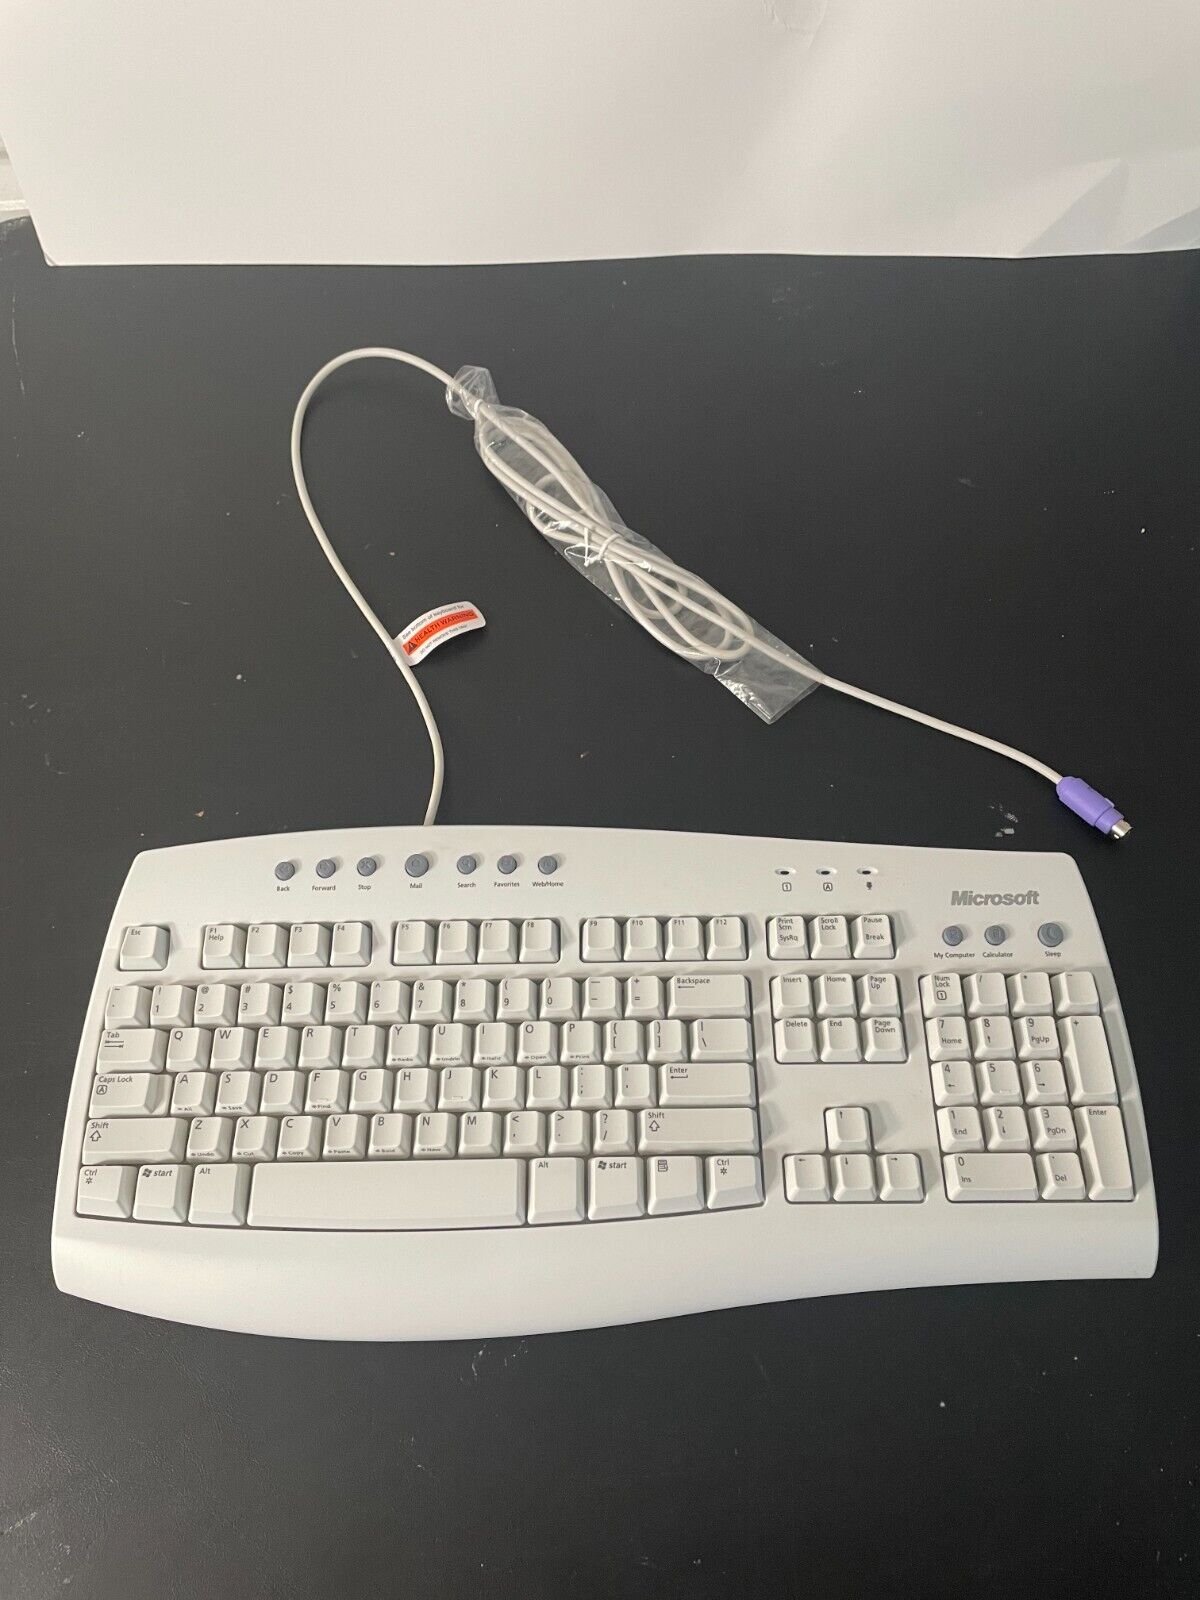 Microsoft Internet Keyboard (PS/2 Wired Connectivity) with Hotkey Support